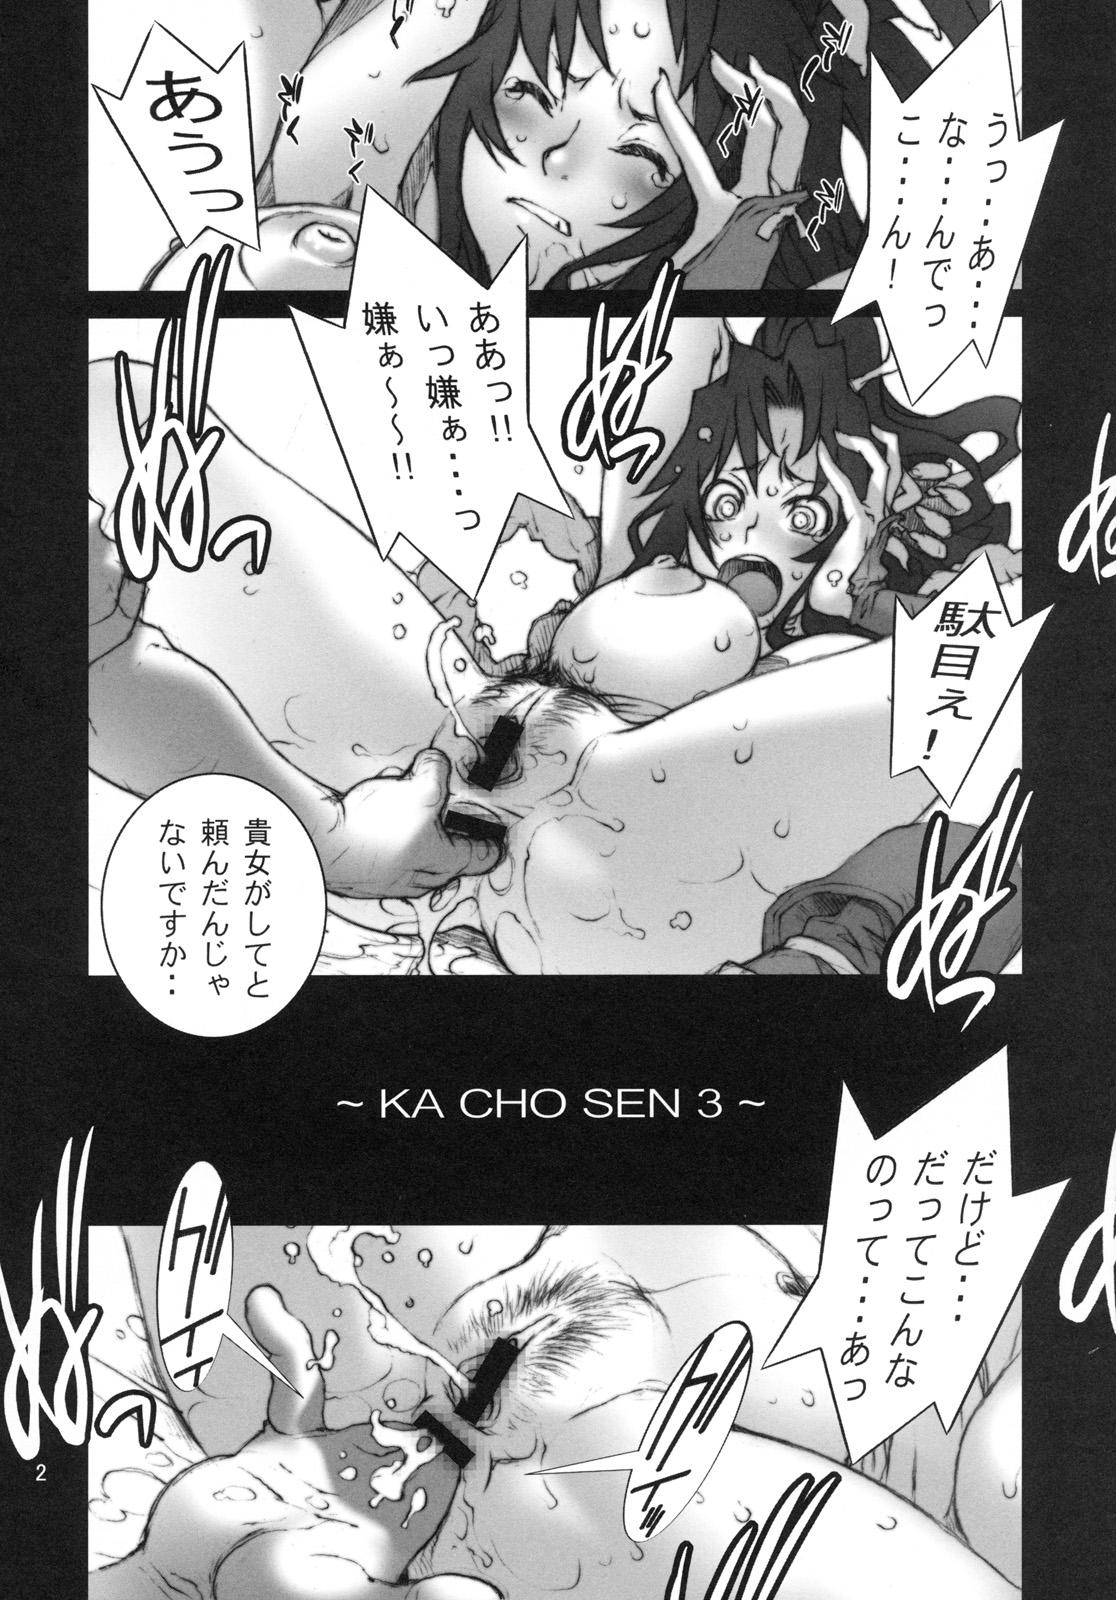 Hidden Camera Kachousen San - King of fighters Stretching - Page 3